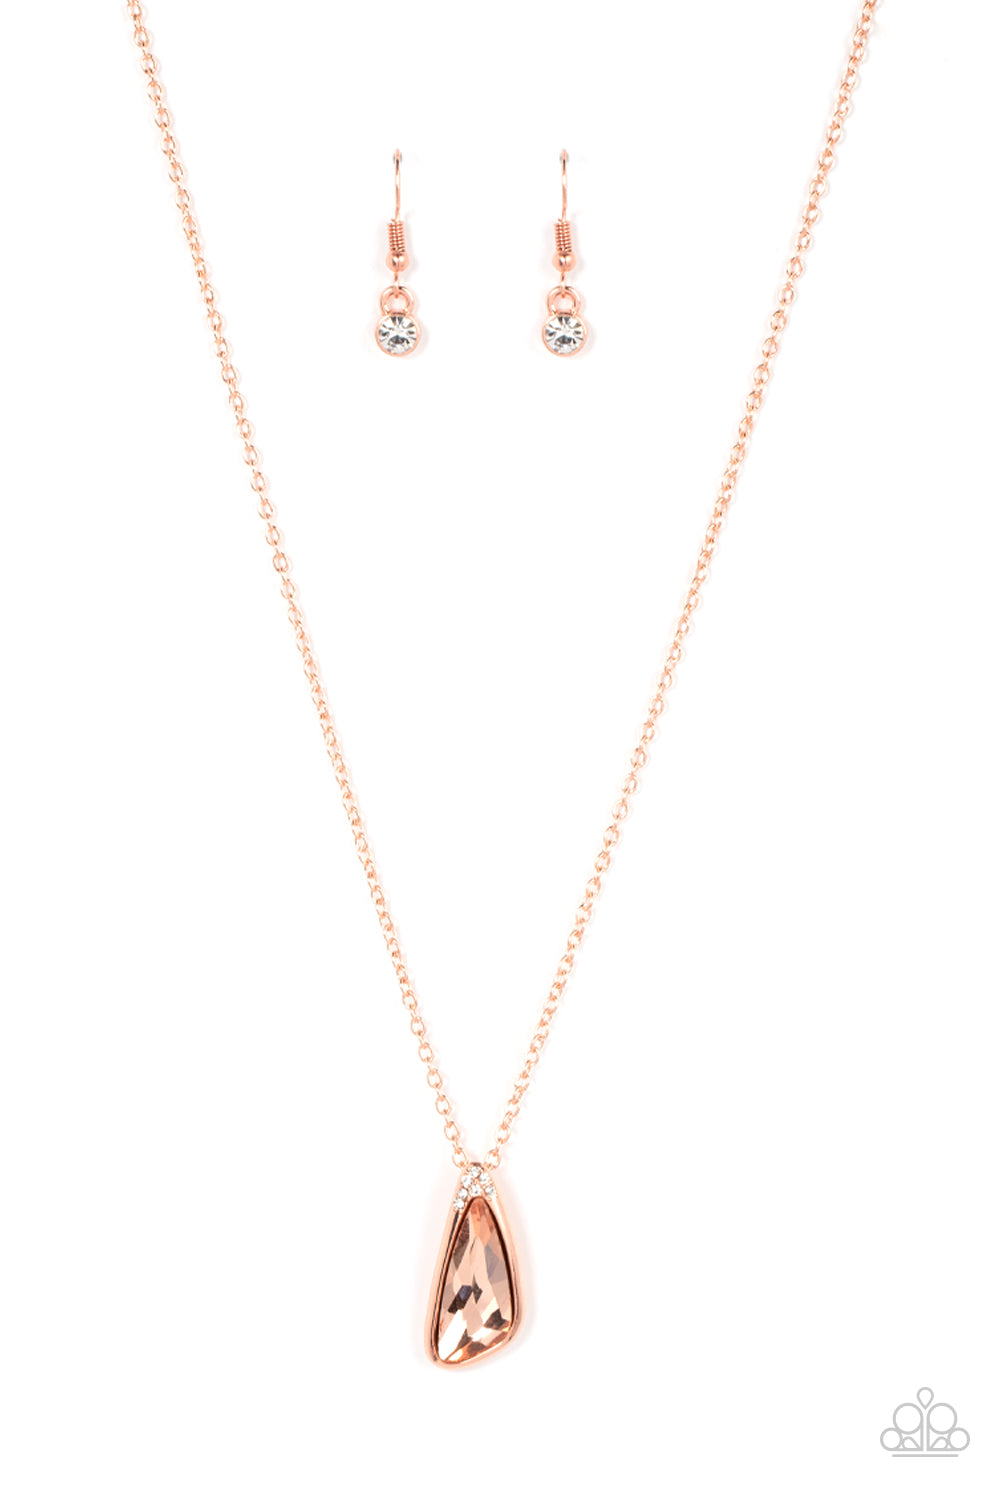 five-dollar-jewelry-envious-extravagance-copper-necklace-paparazzi-accessories